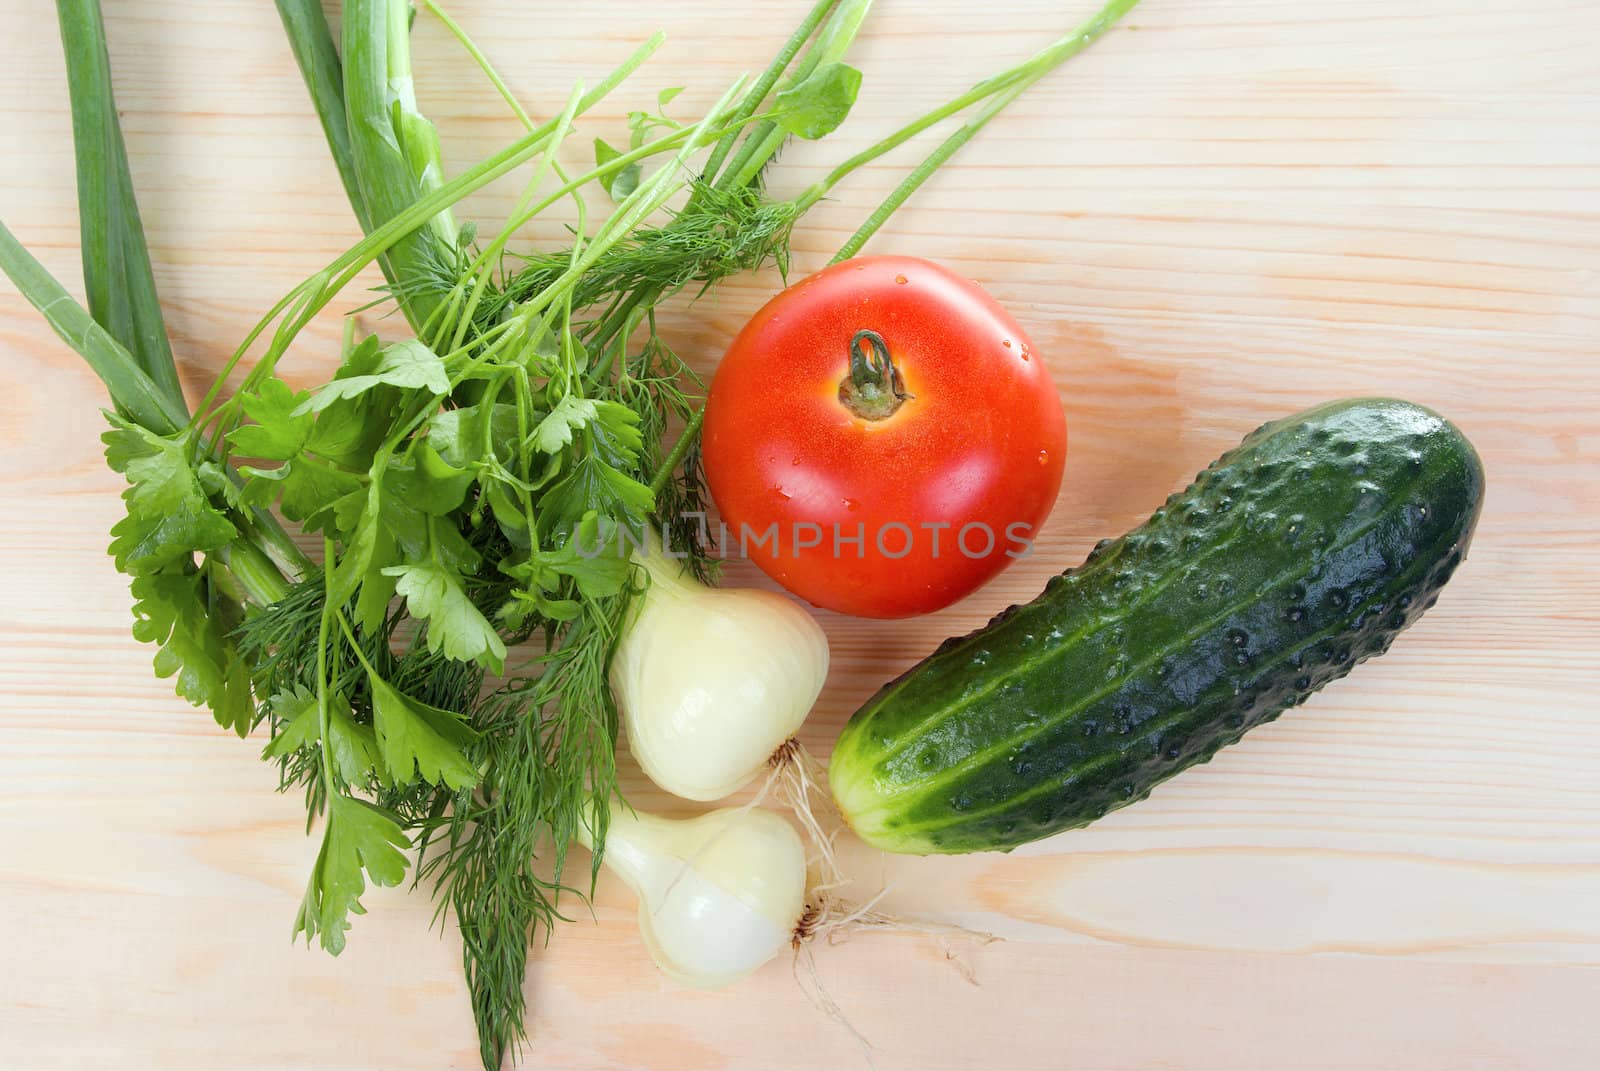  Fresh and vegetable On a wooden board